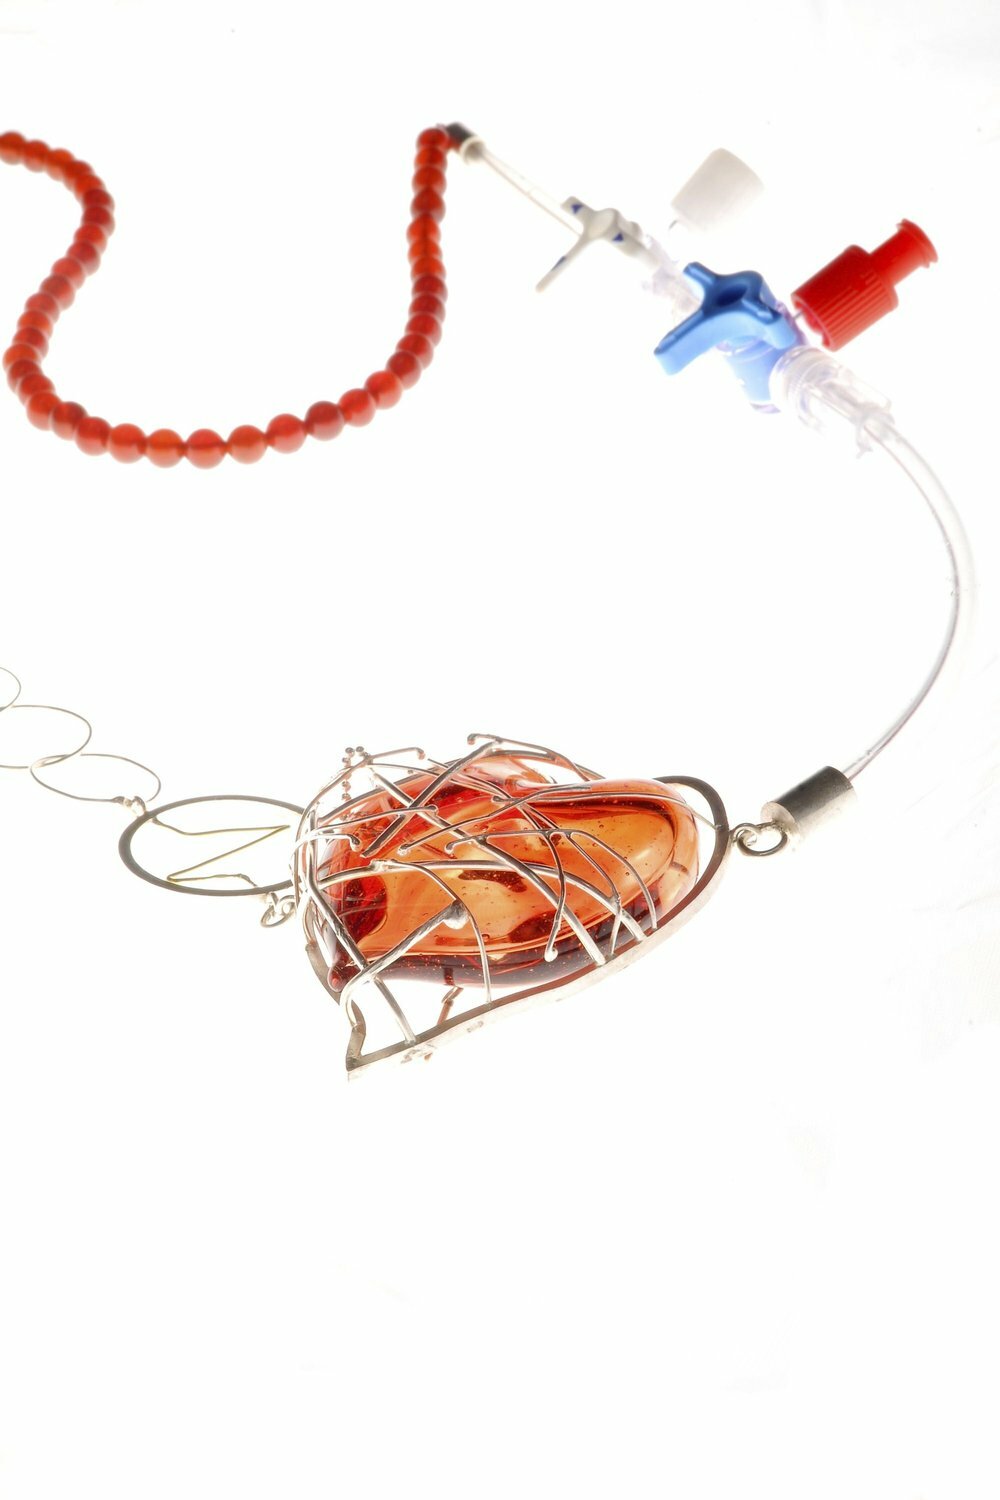 "My First Heart Attack", Necklace, 2010, Glass, catheter, cornaline, gold, silver